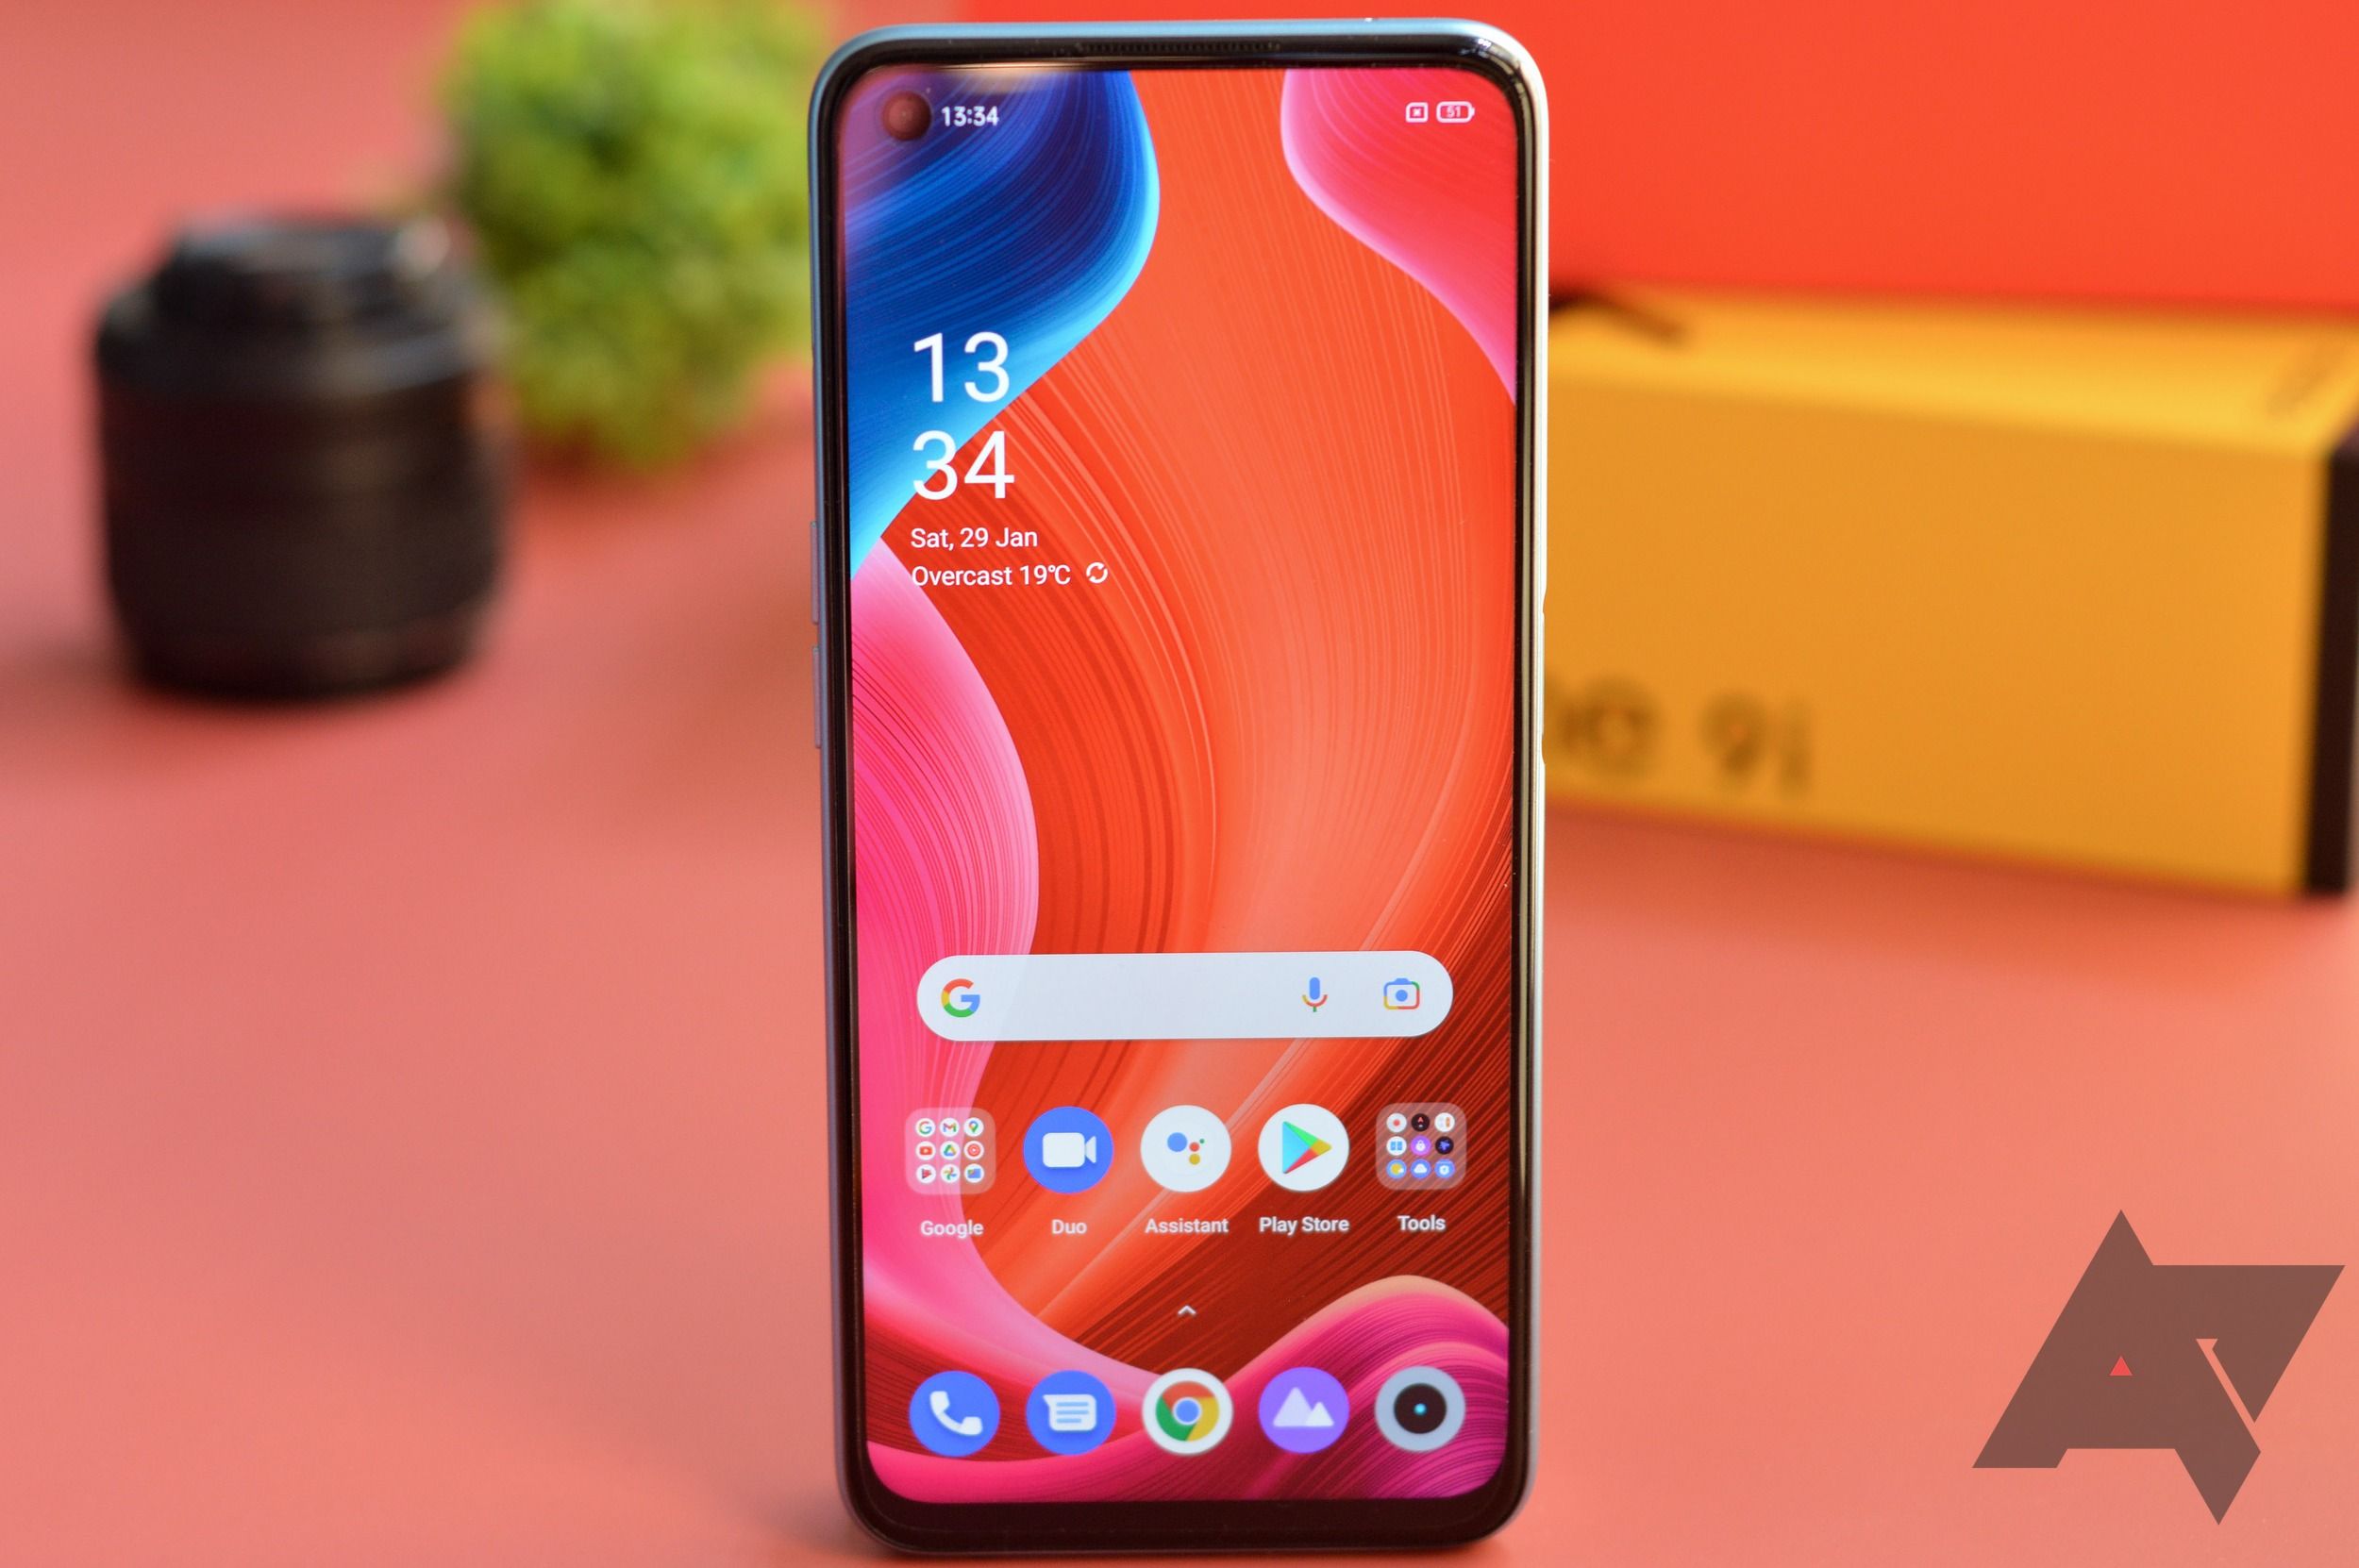 Realme 9i quick review: Fresh looks, good specifications make it appealing